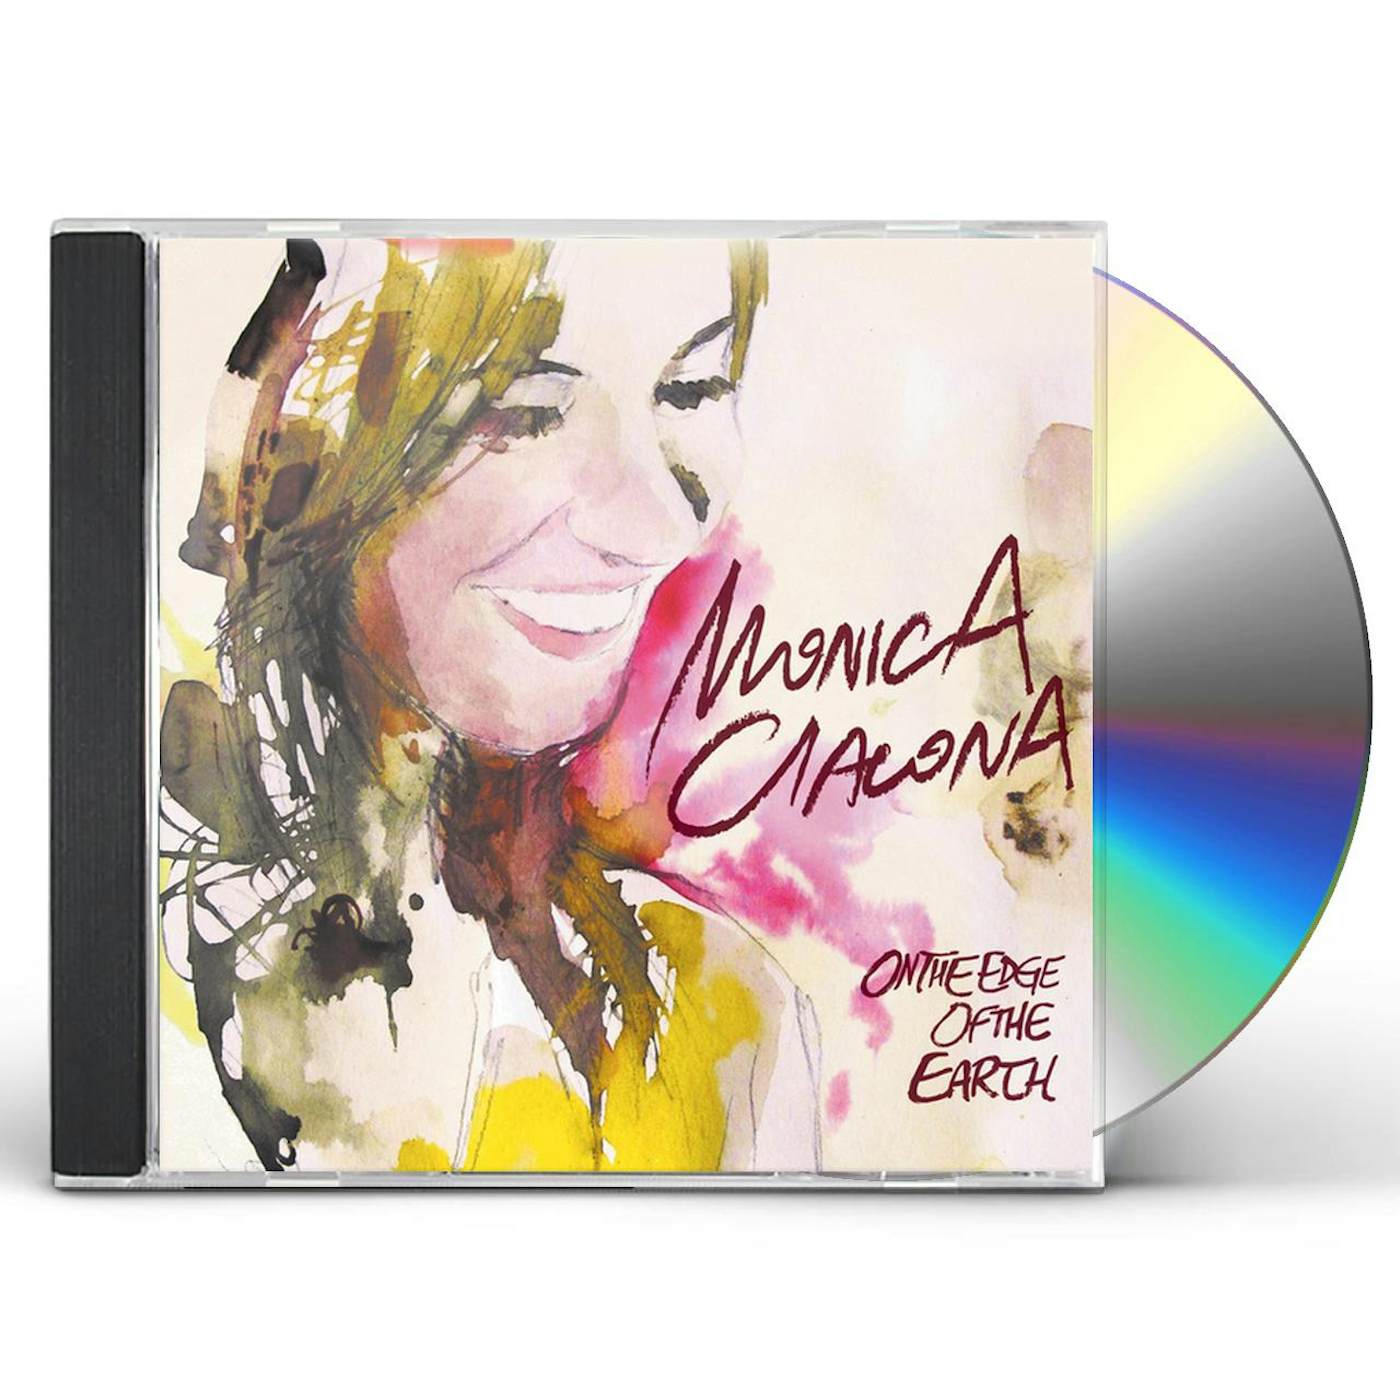 Monica ON THE EDGE OF THE EARTH CD